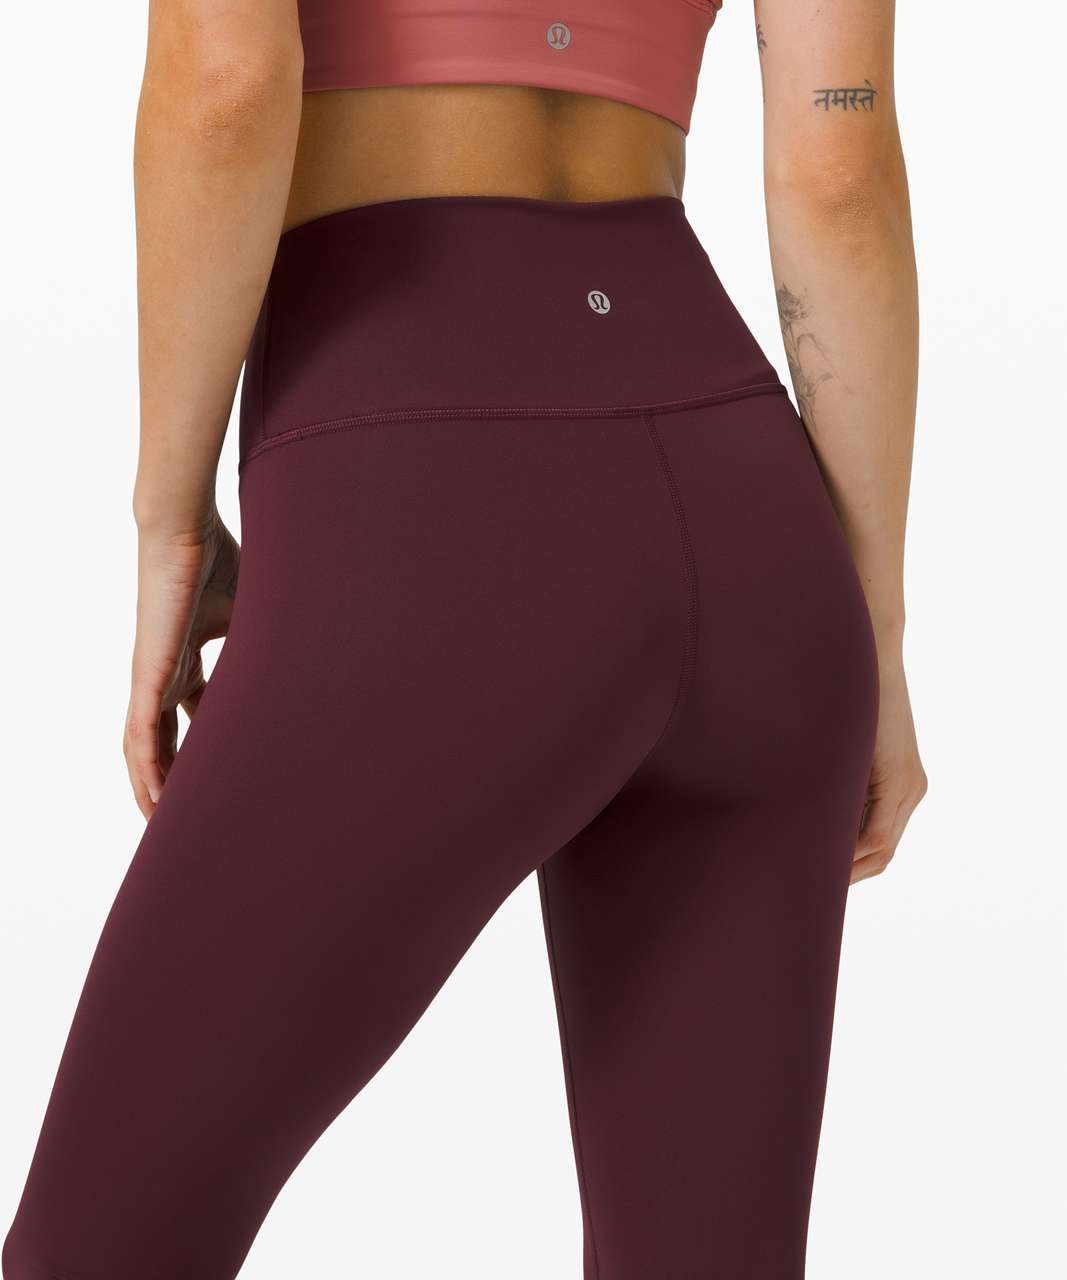 Lululemon Wunder Under High-Rise Tight 25" *Full-On Luxtreme - Cassis (First Release)